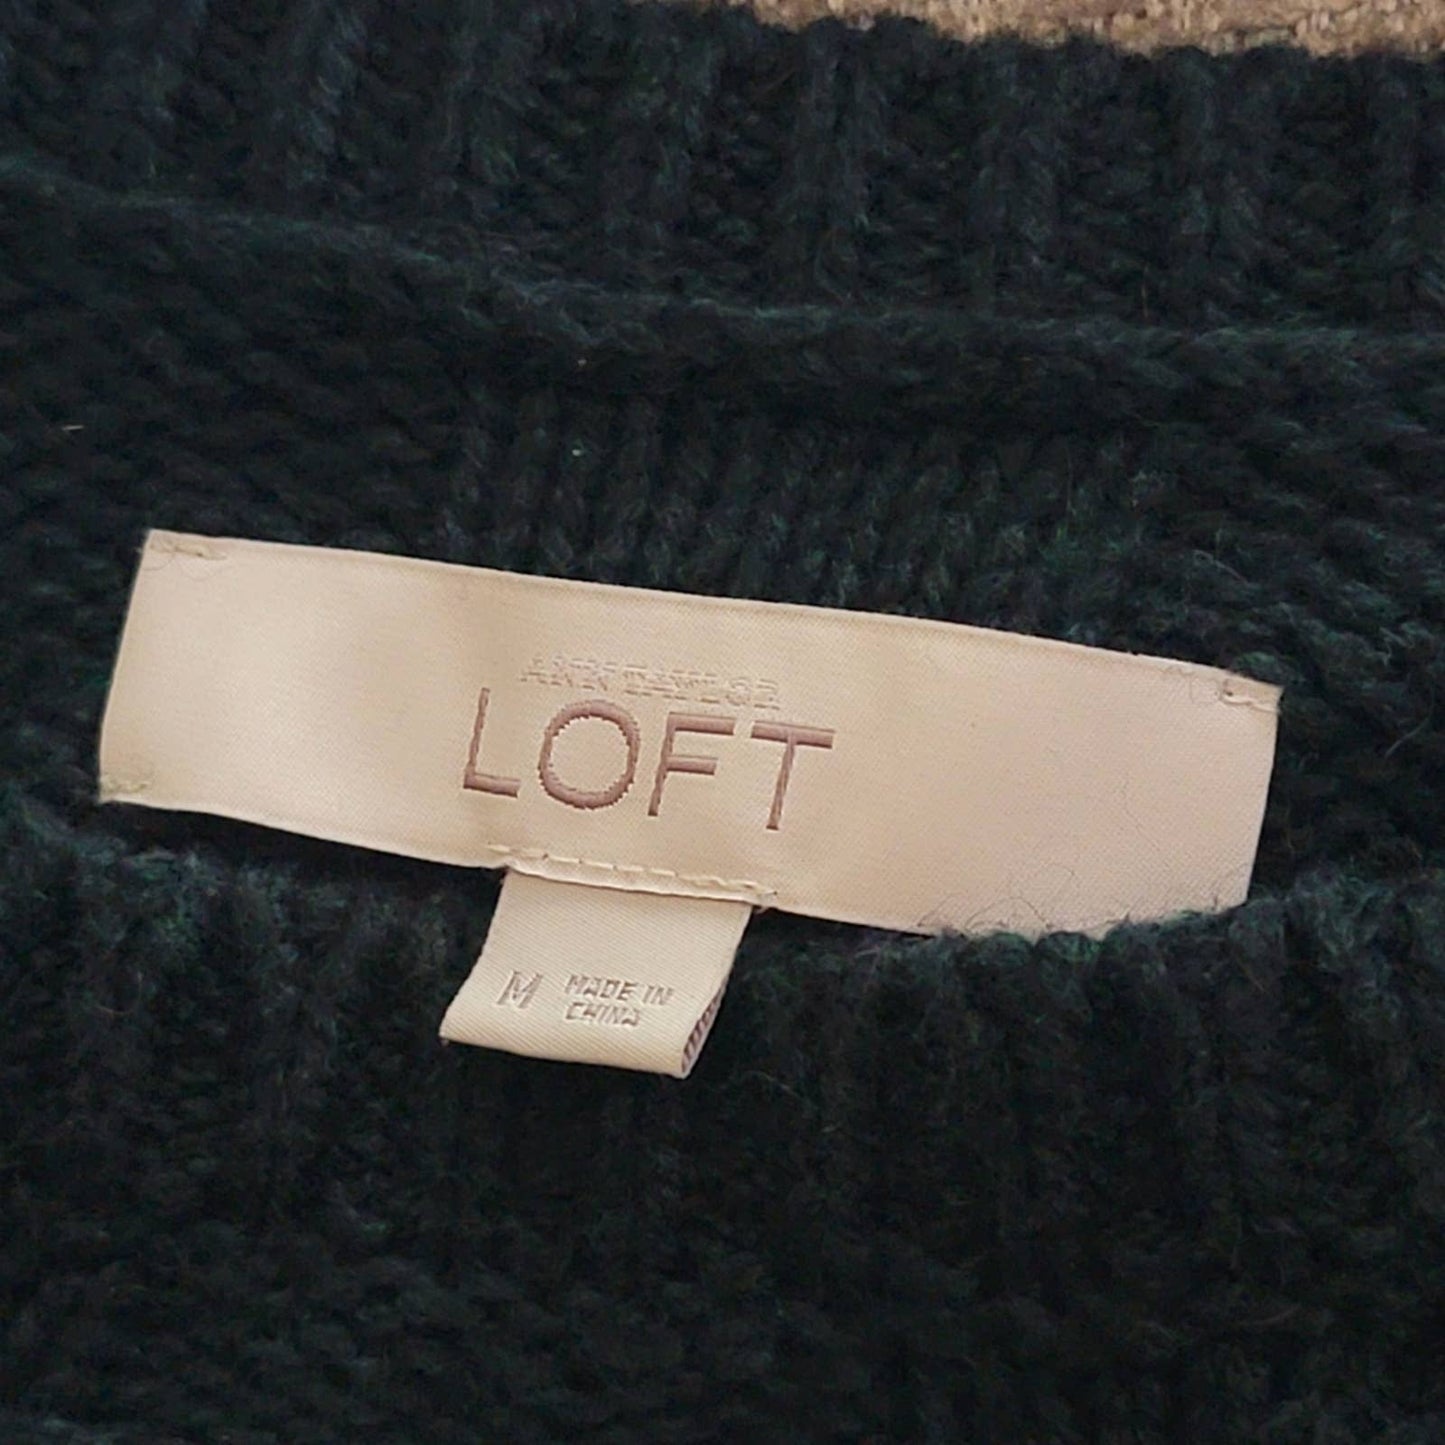 LOFT Camel Hair Sage Green Cable Knit Sweater - M